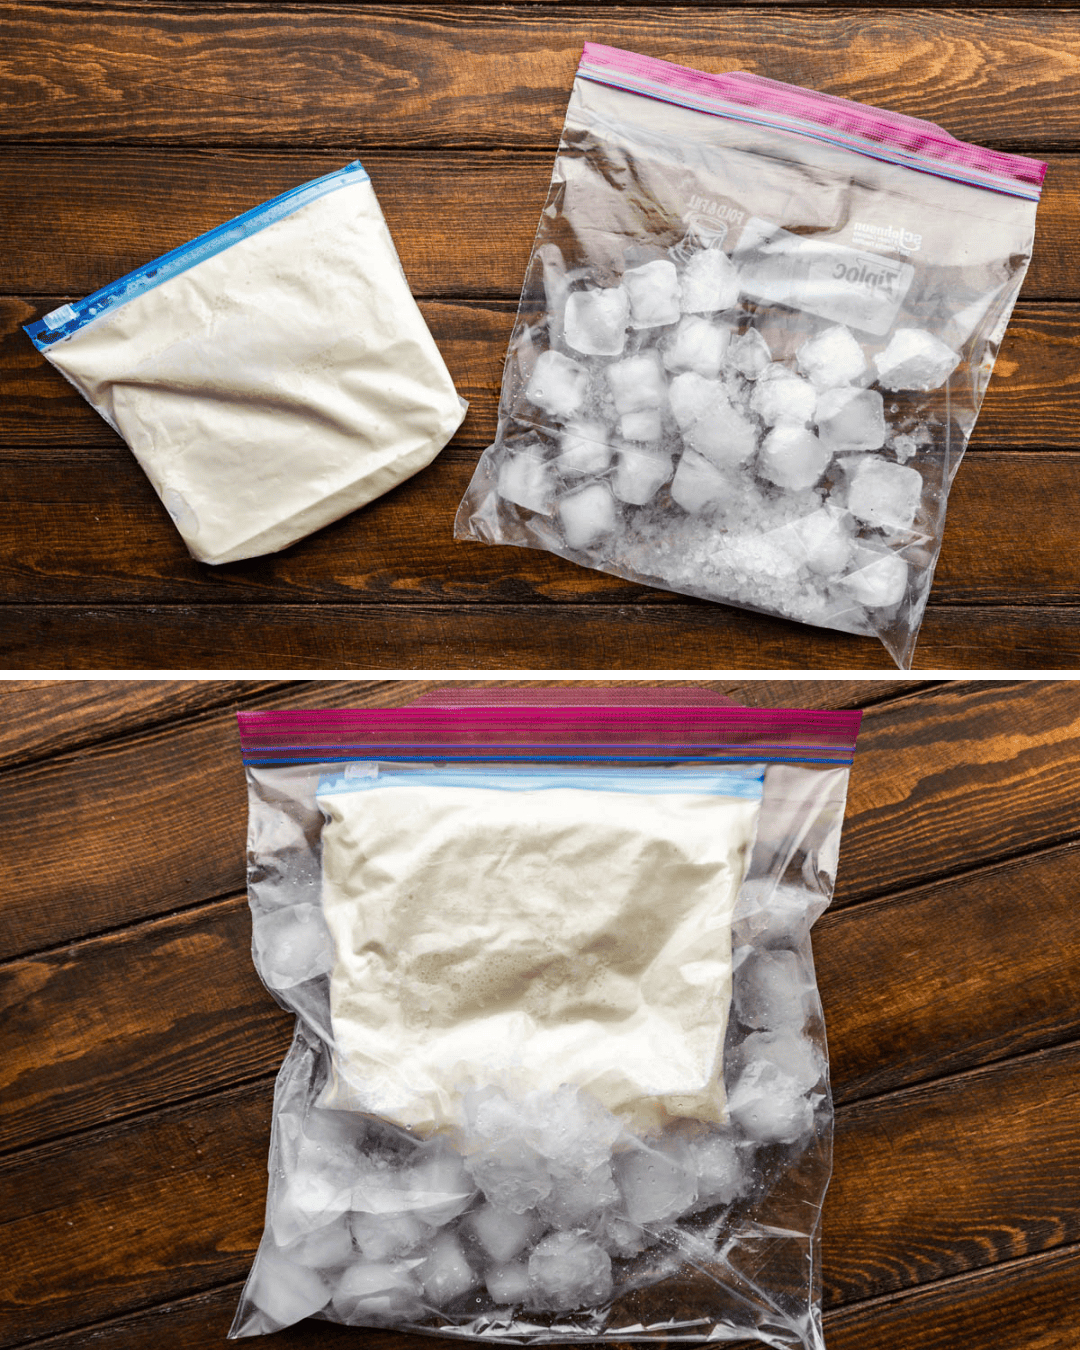 Pictures of the 5-minute ice cream making process showing an ice cream bag inside an ice cream bag.